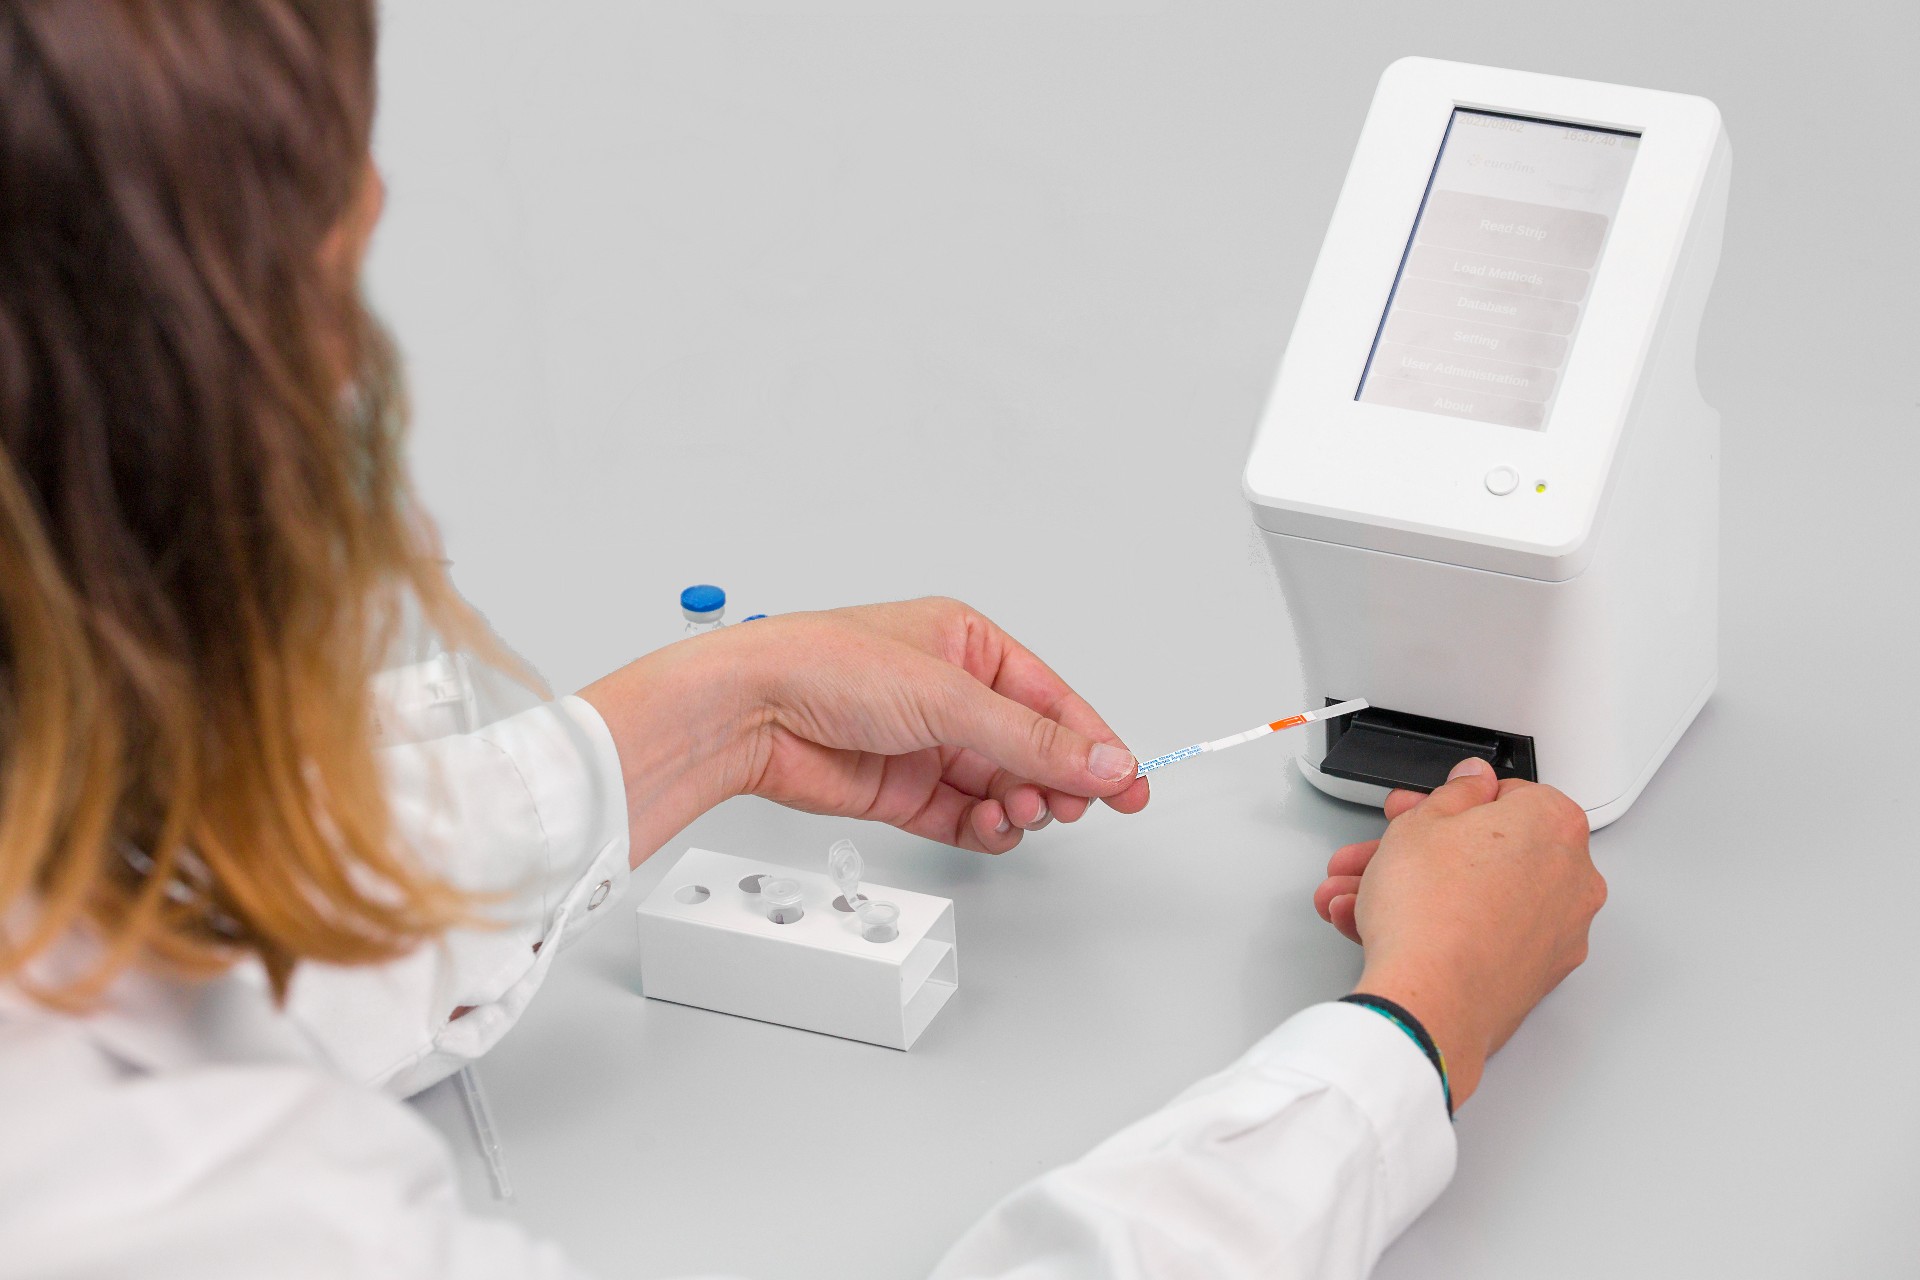 New Lateral Flow Reader RapidScan ST5-W as a single platform validated for multiple food and environmental rapid tests